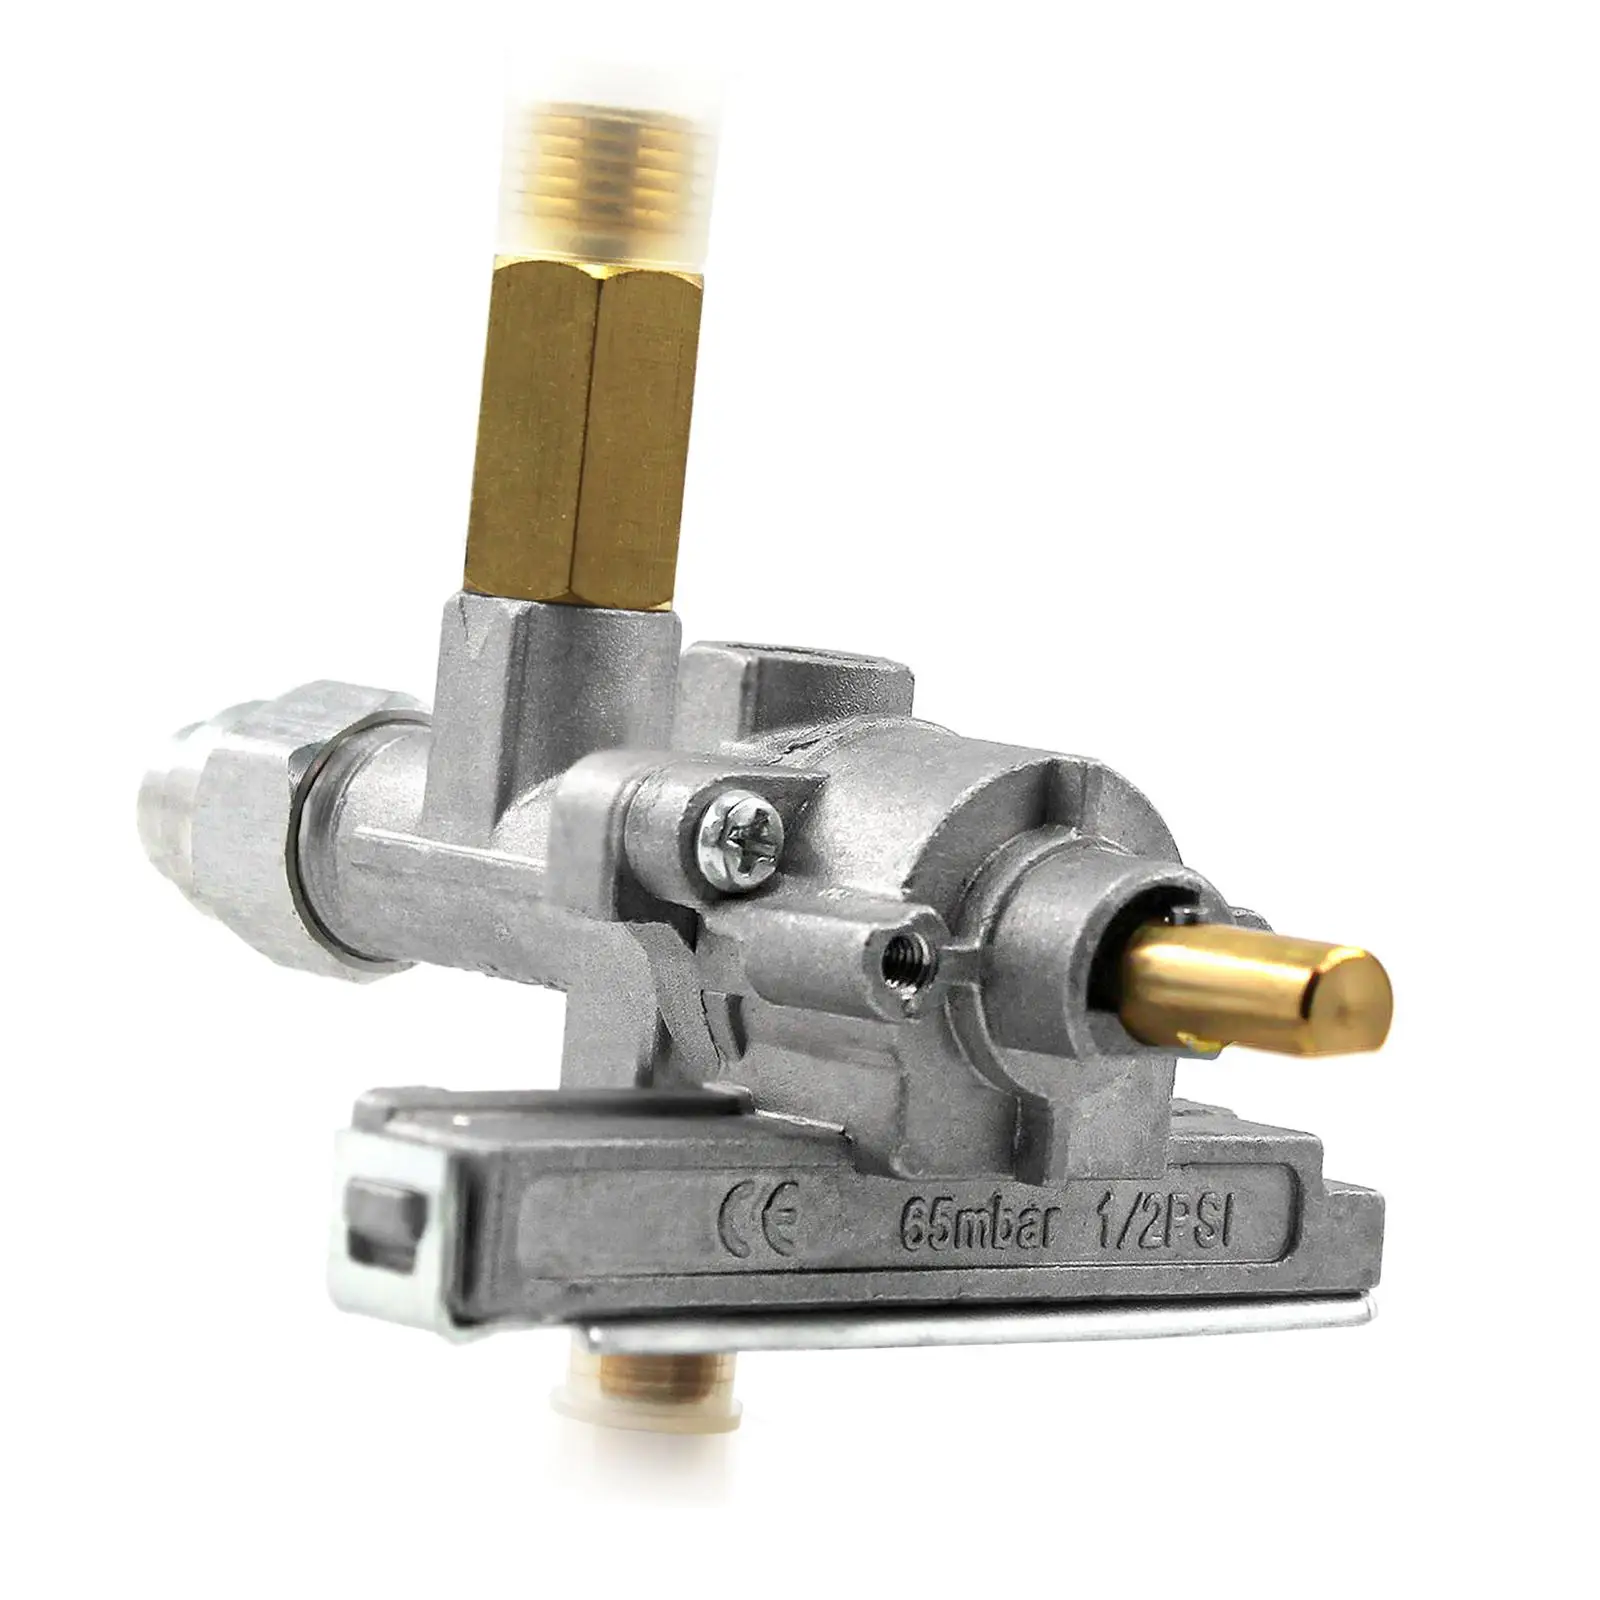 Control Safety Valve Regulator Control Valve for Grill Ovens Replacement Accessory